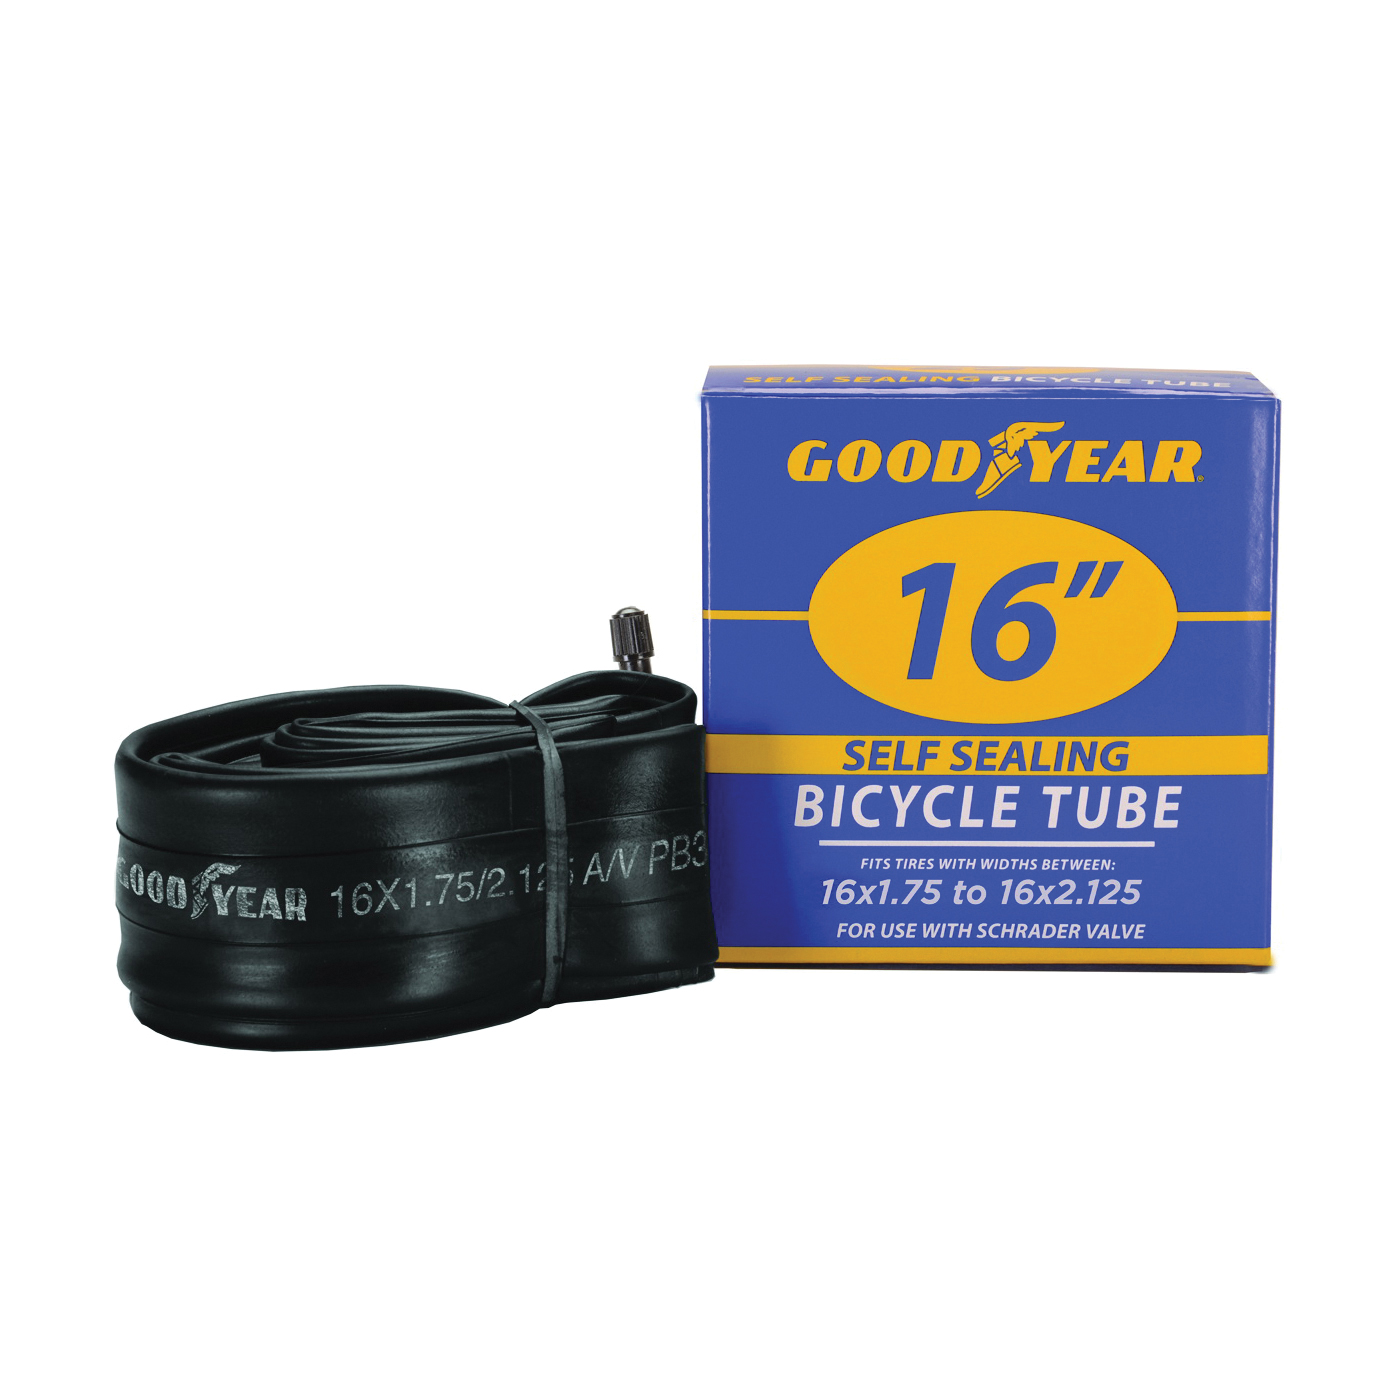 95201 Bicycle Tube, Self-Sealing, For: 16 x 1-3/4 in to 2-1/8 in W Bicycle Tires